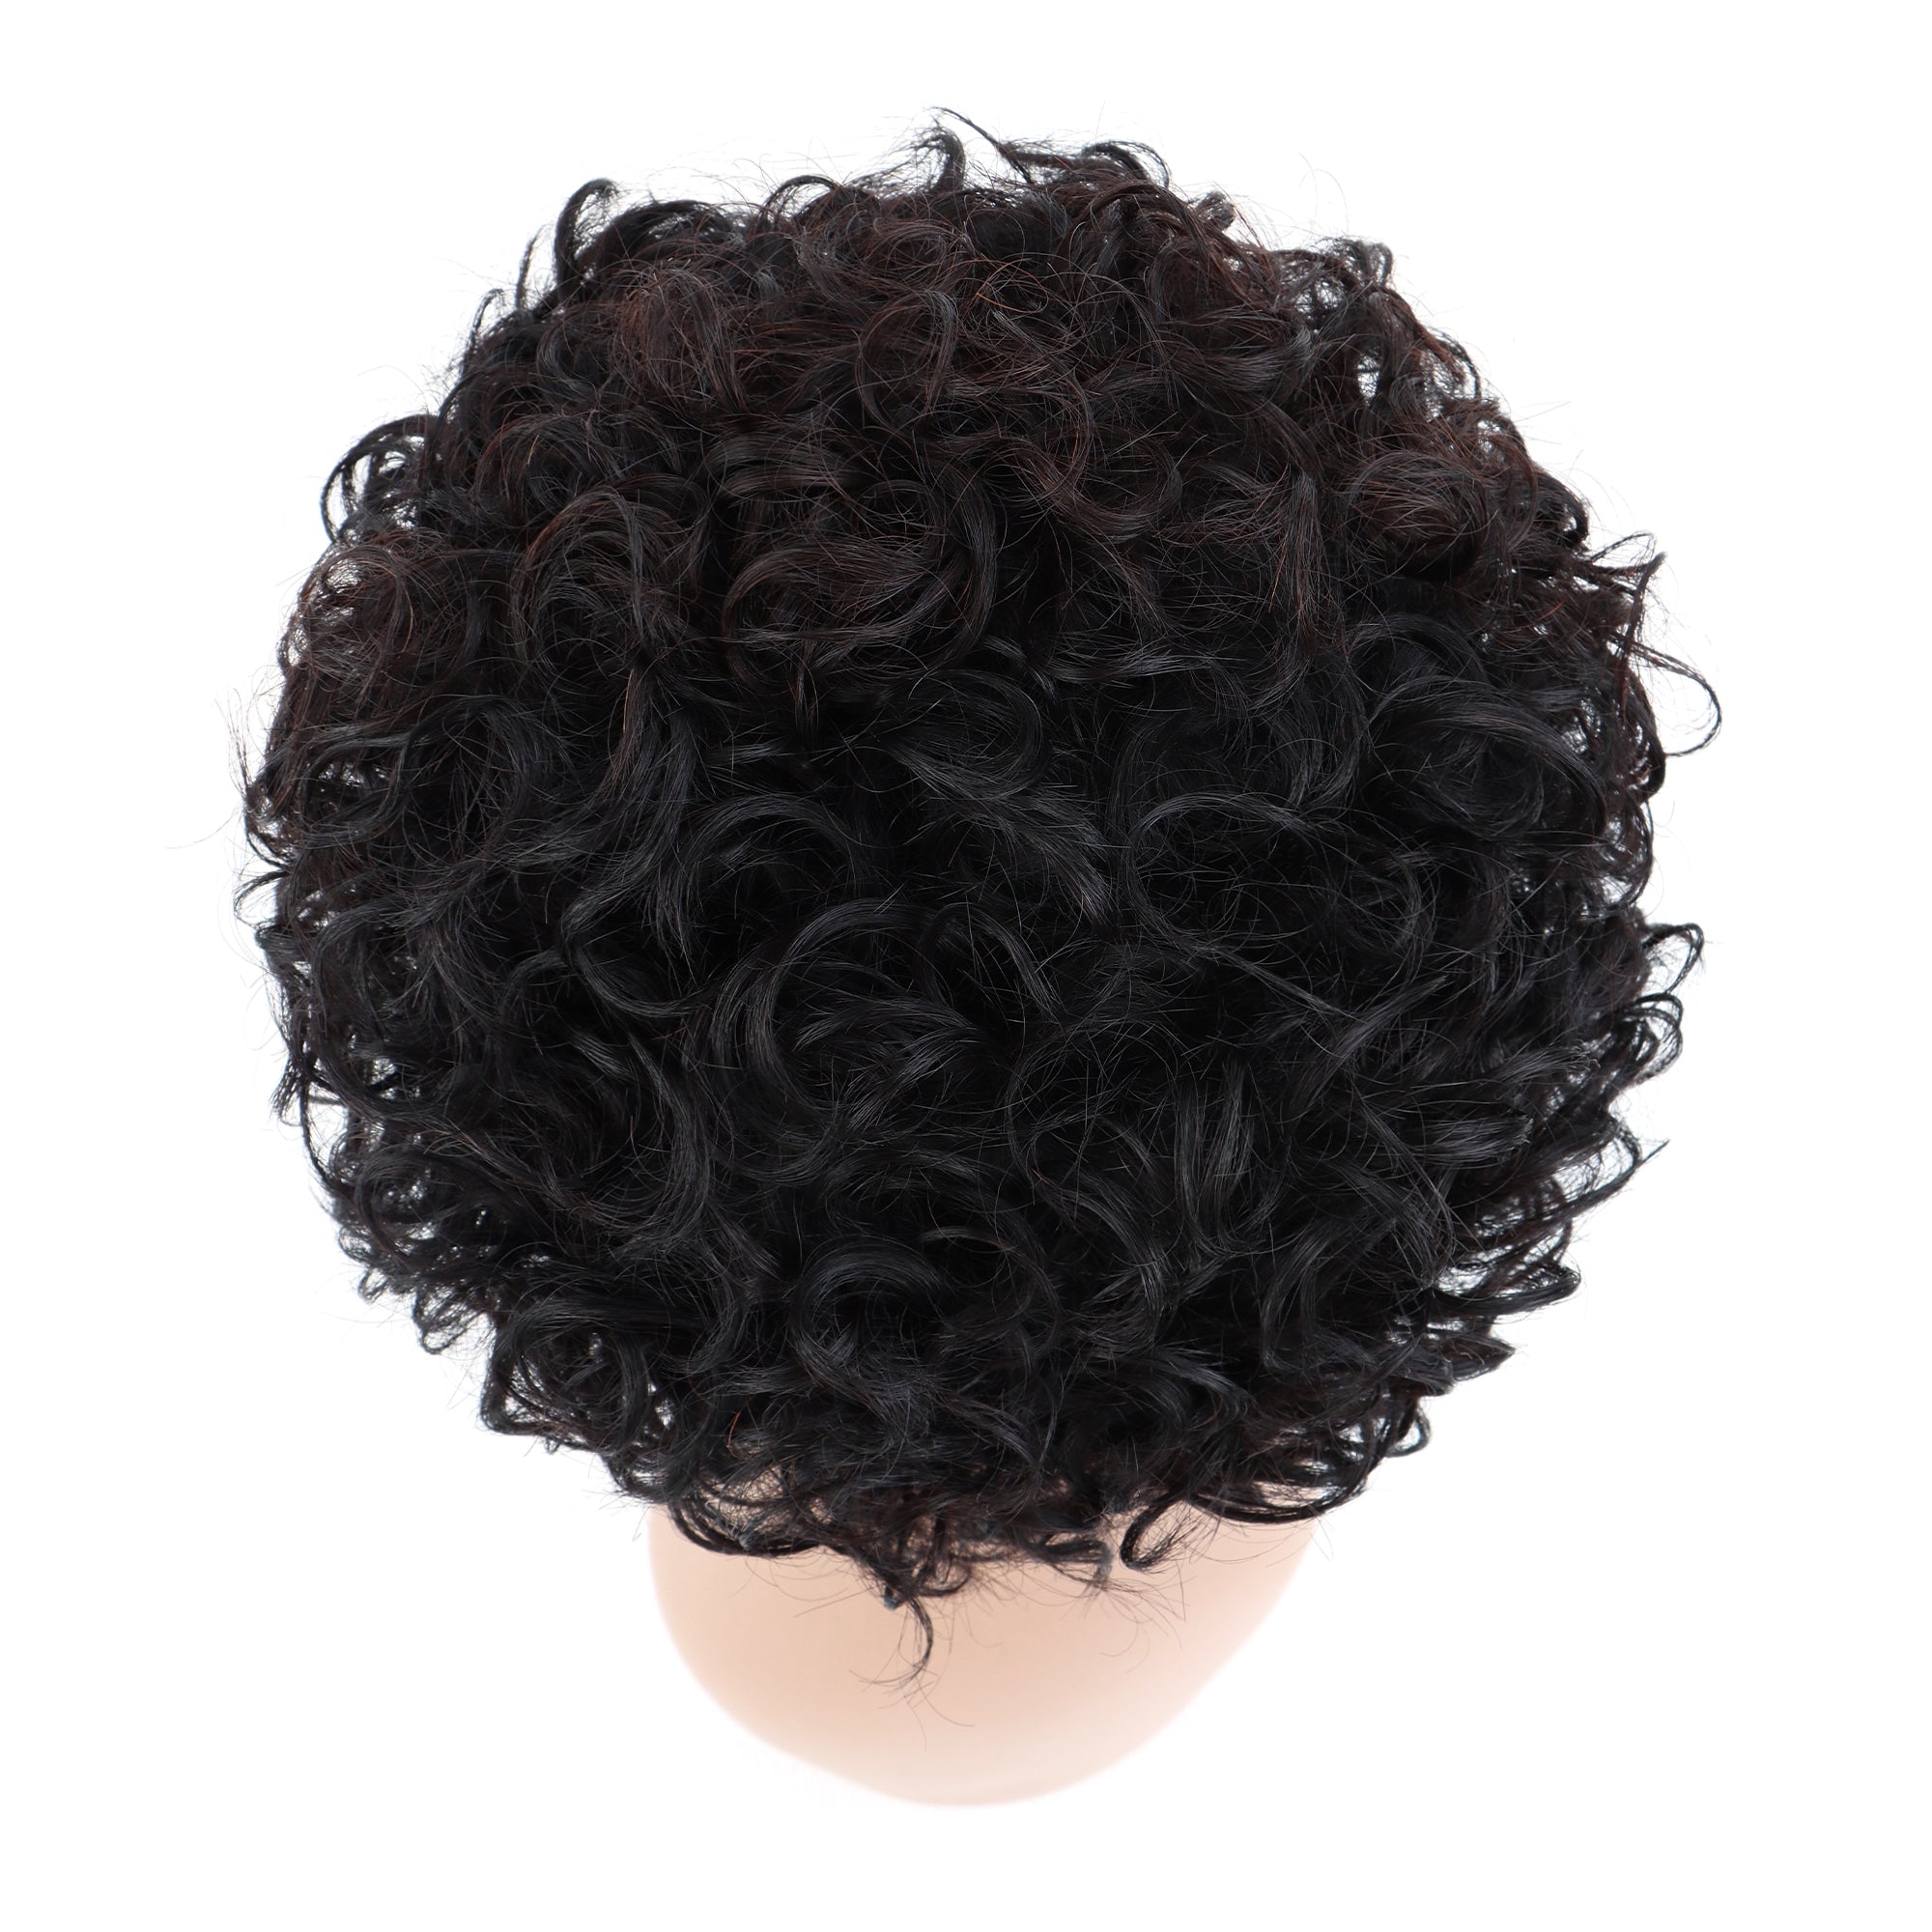 Summer Pixie Wig 150% Density Curly Human Hair Wig 6 Inch #1B Natural Color U8146